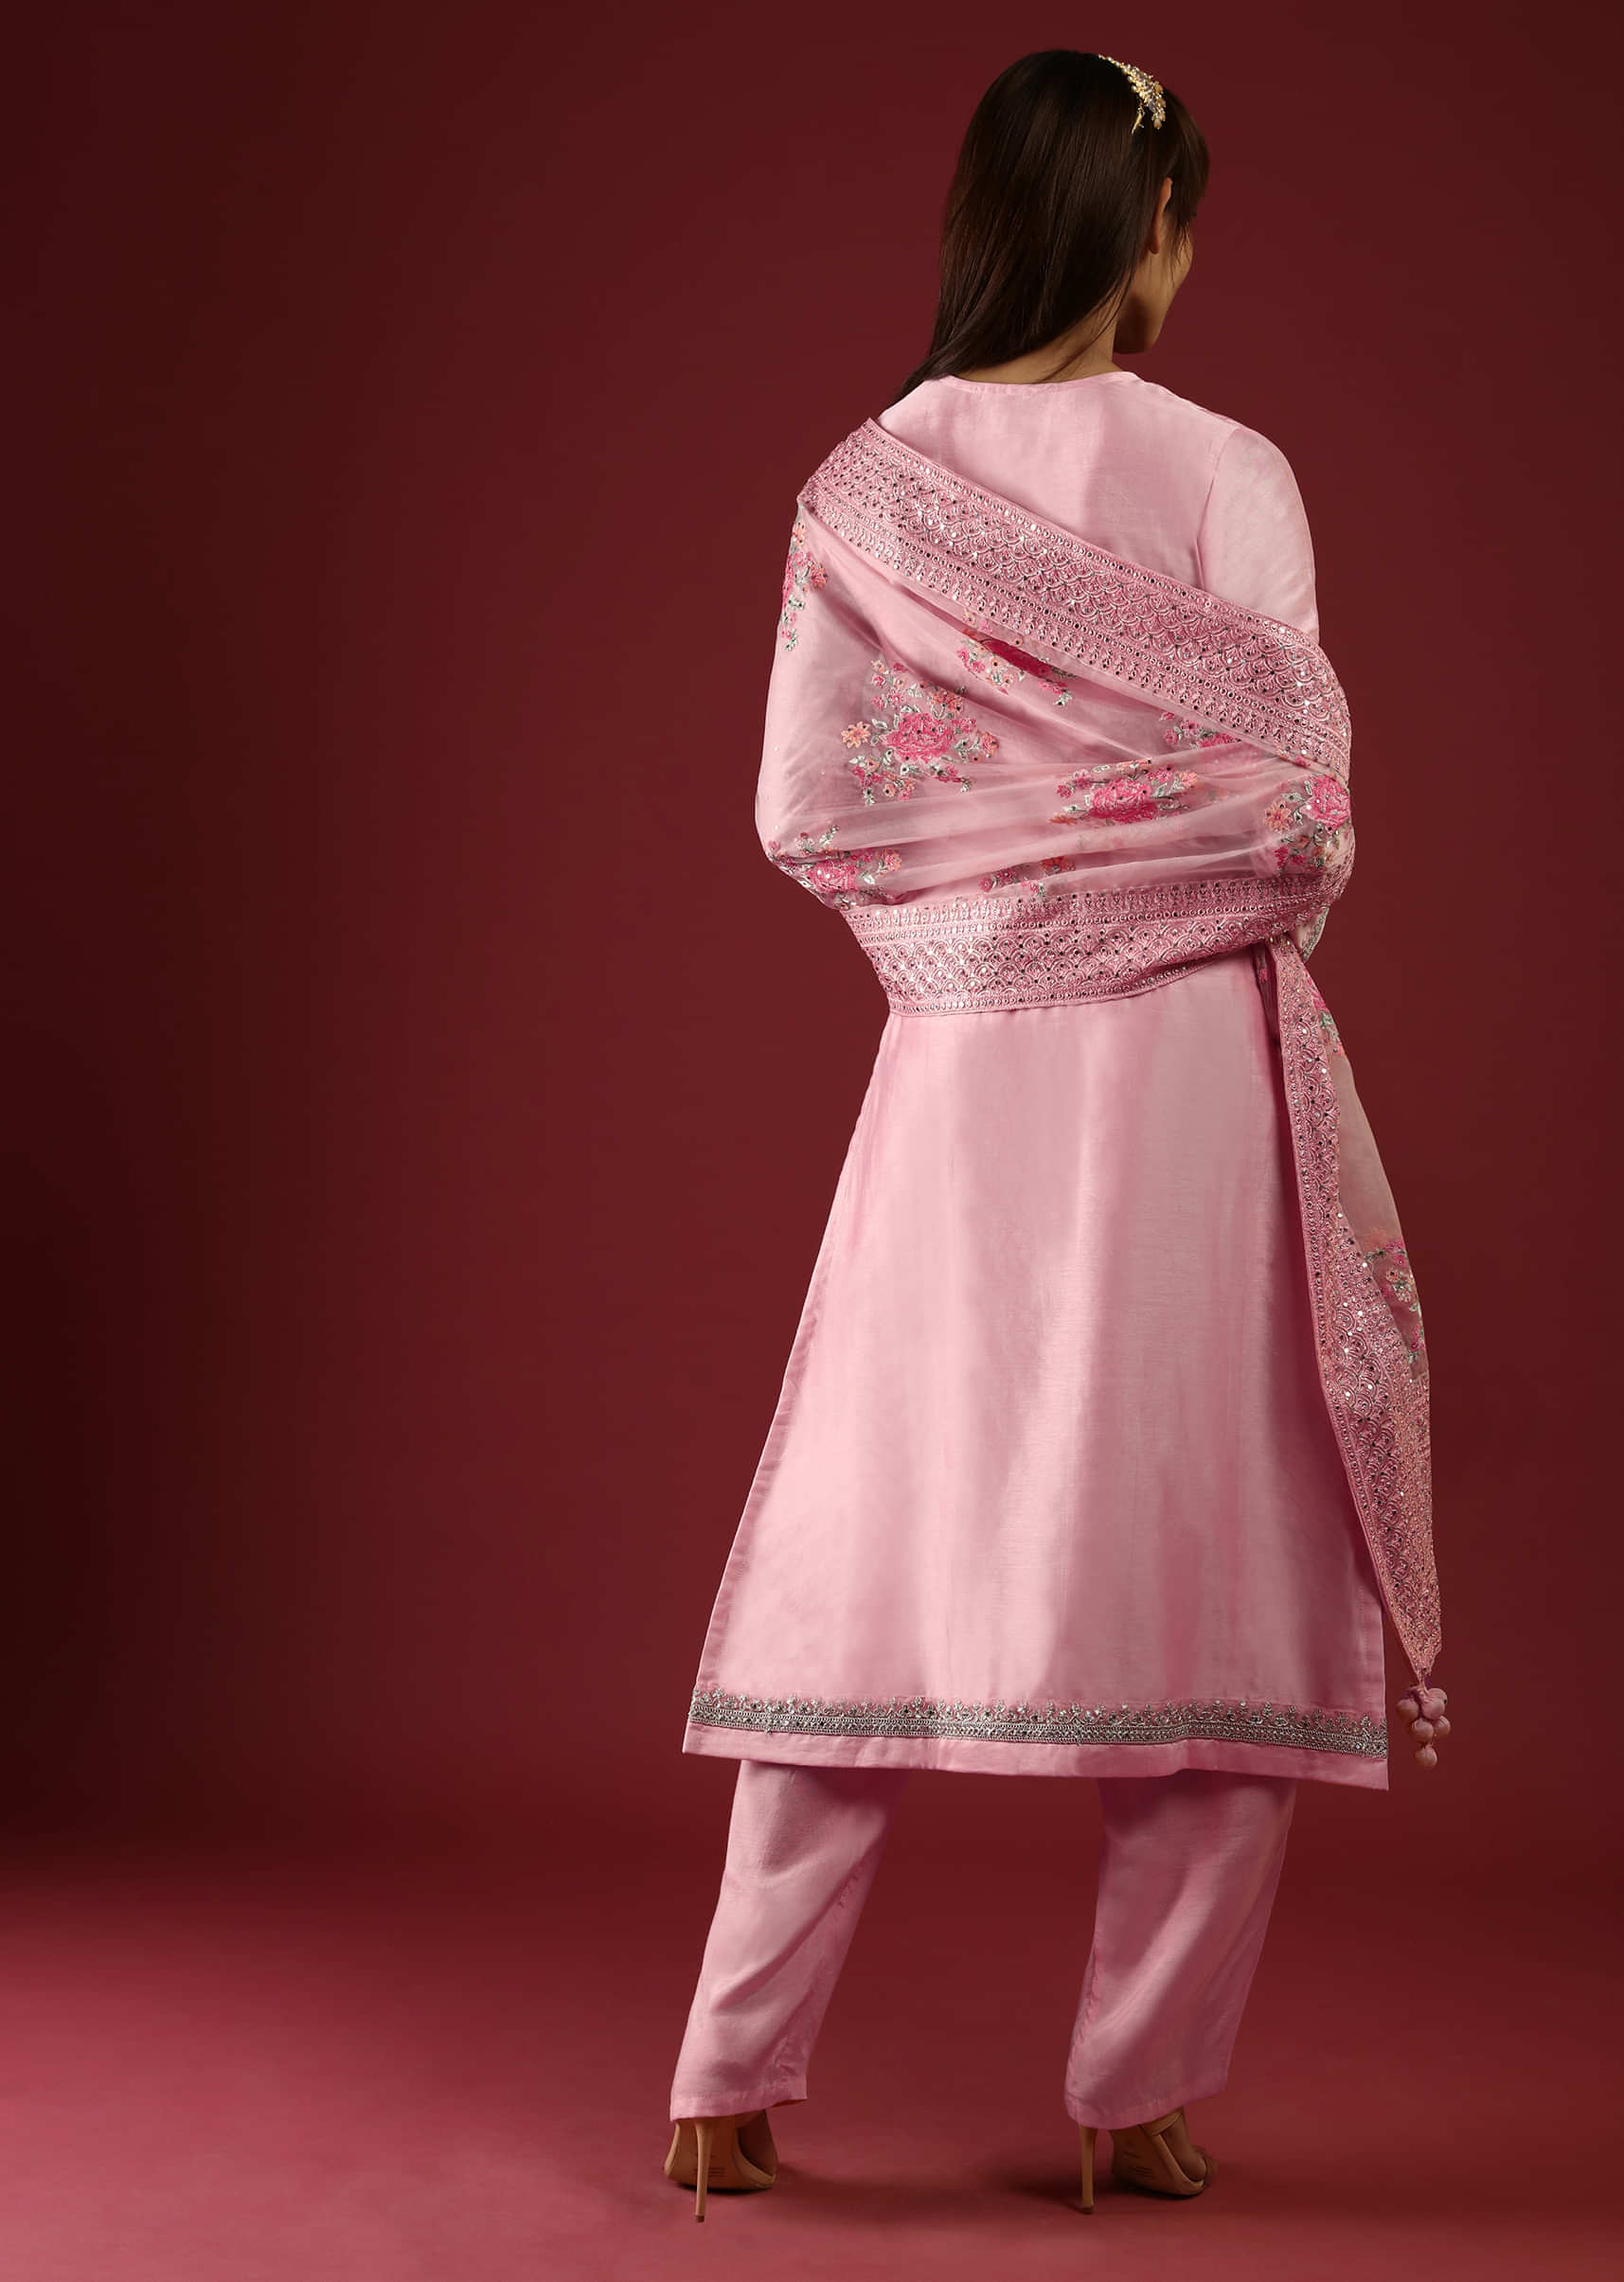 Pastel Pink Straight Cut Suit With Mirror Work On The Yoke And An Organza Dupatta With Multi Colored Thread Embroidered Floral Motifs  